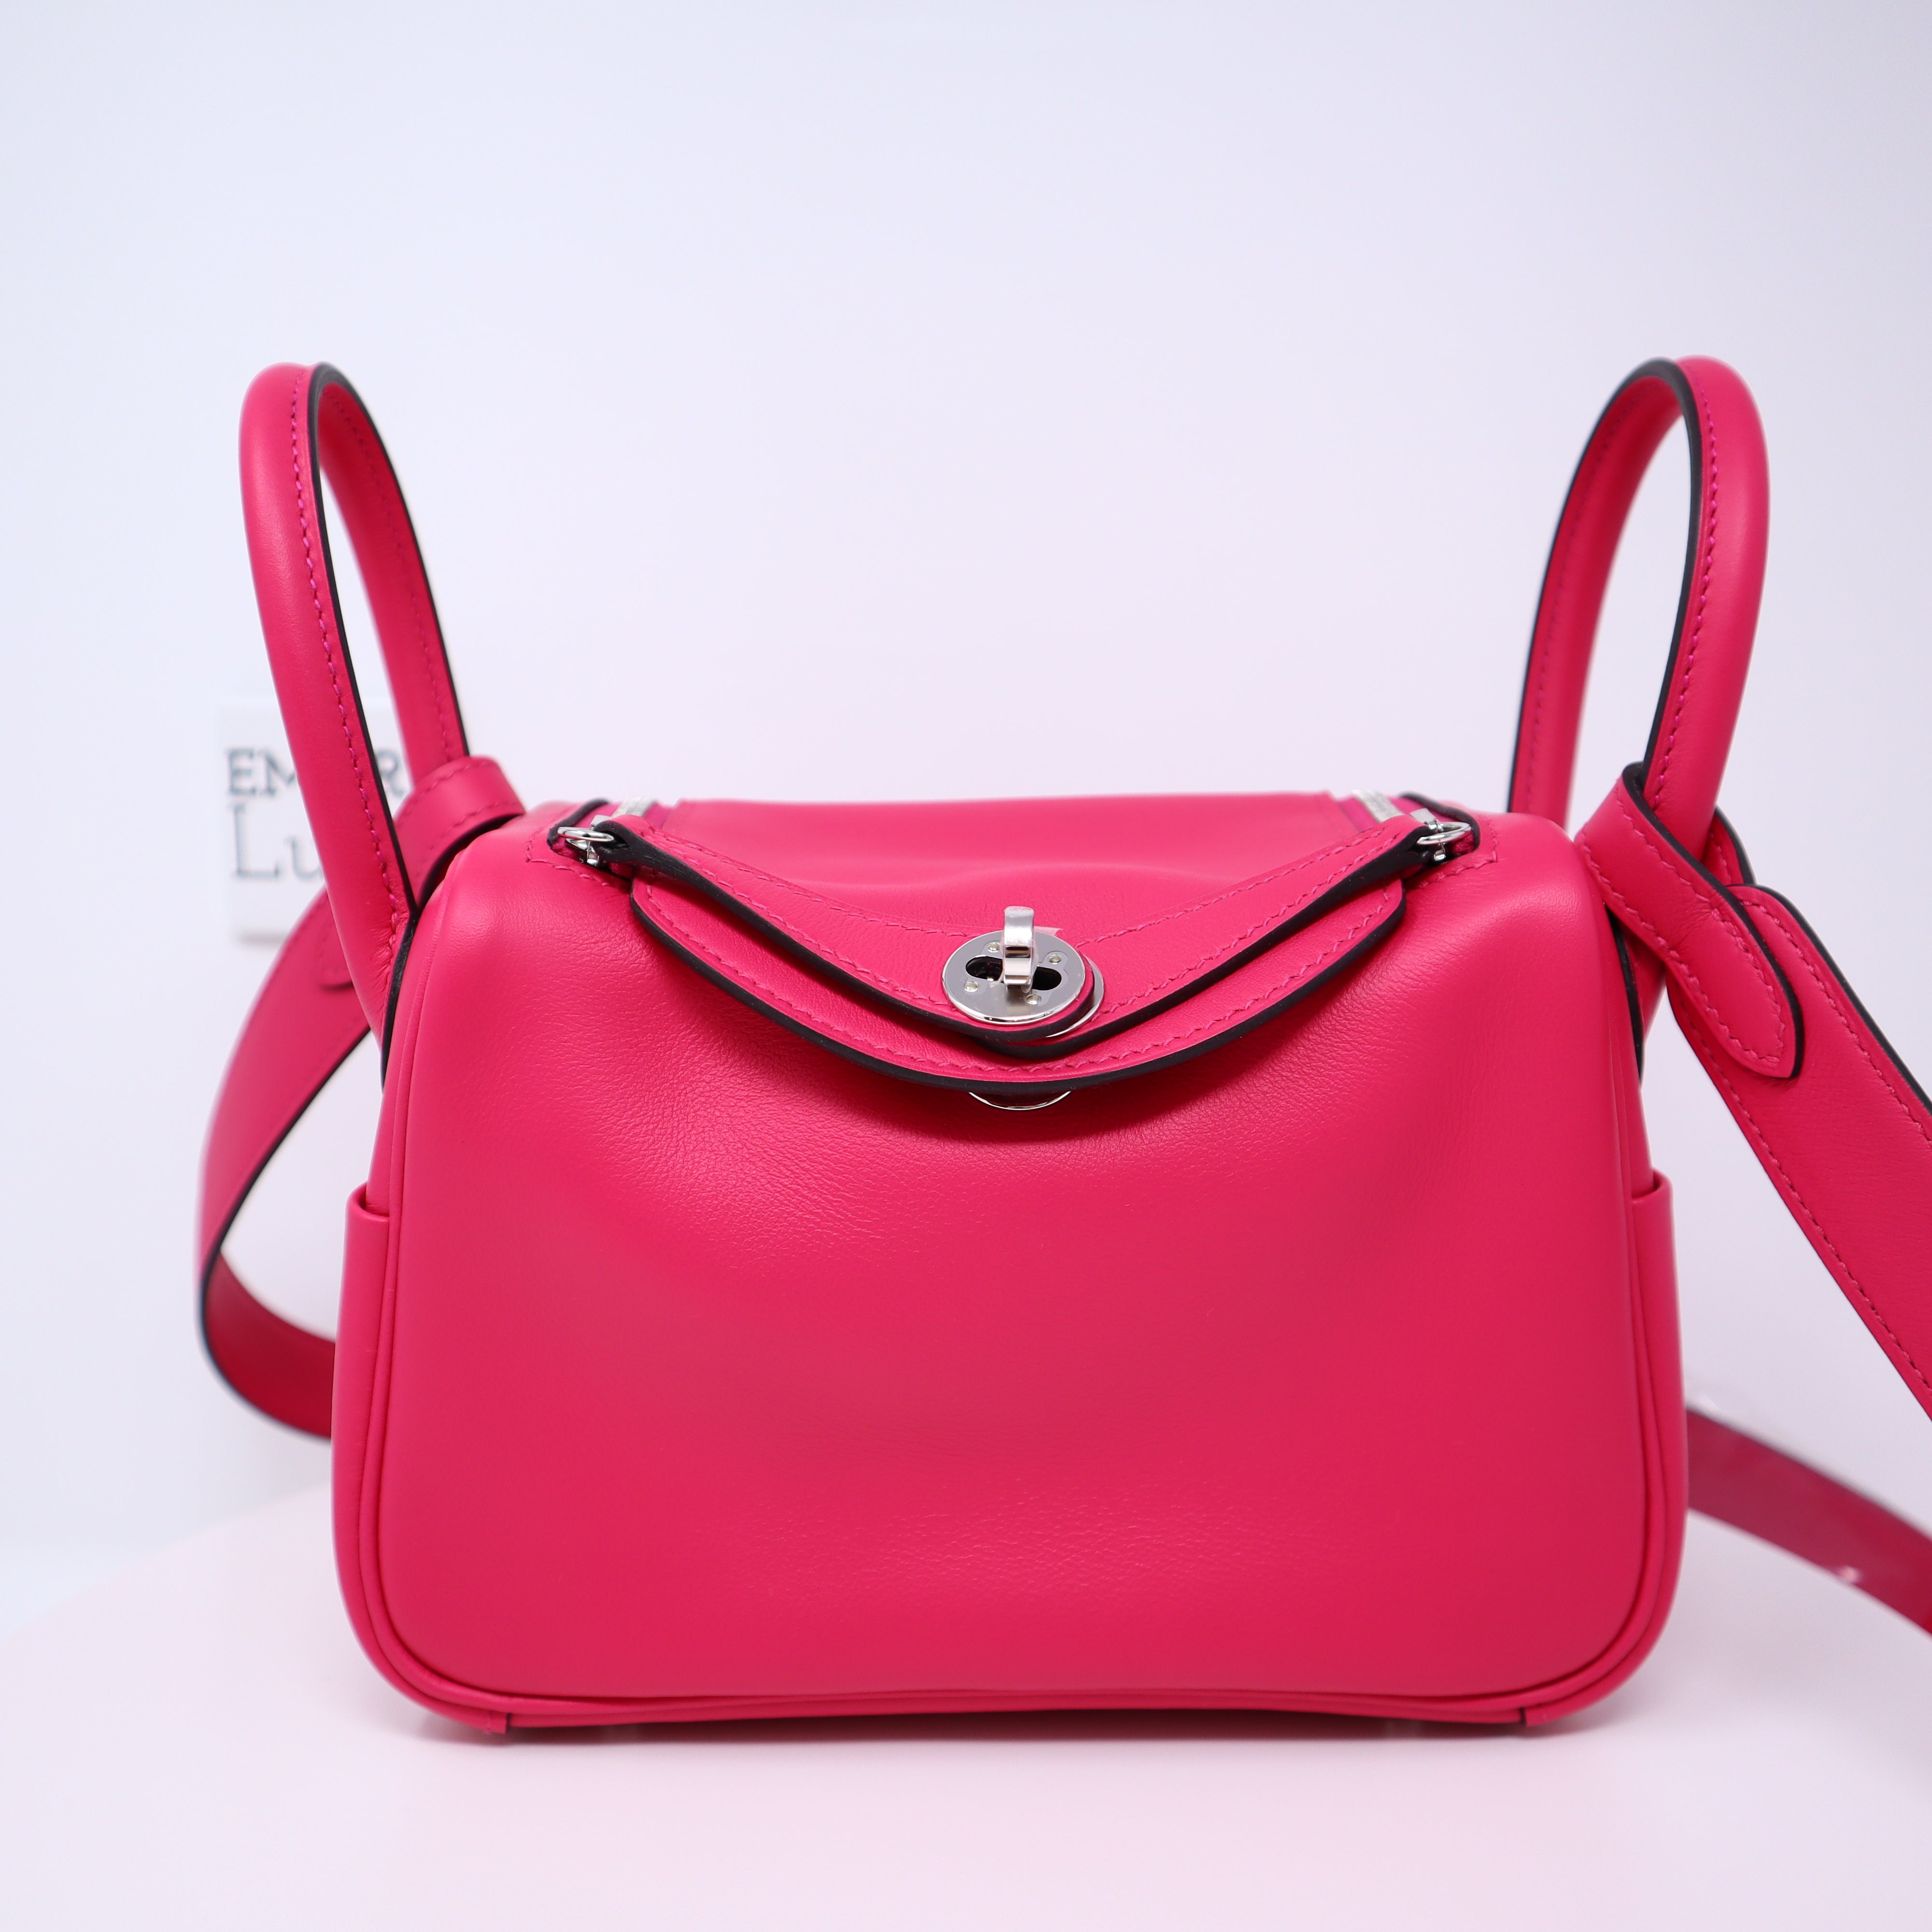 Ladybaggss - New color.. Hermes mini lindy rose texas. Good deal. Rm3x,xxx  only. Whatsapp +60143580905 for ur purchase